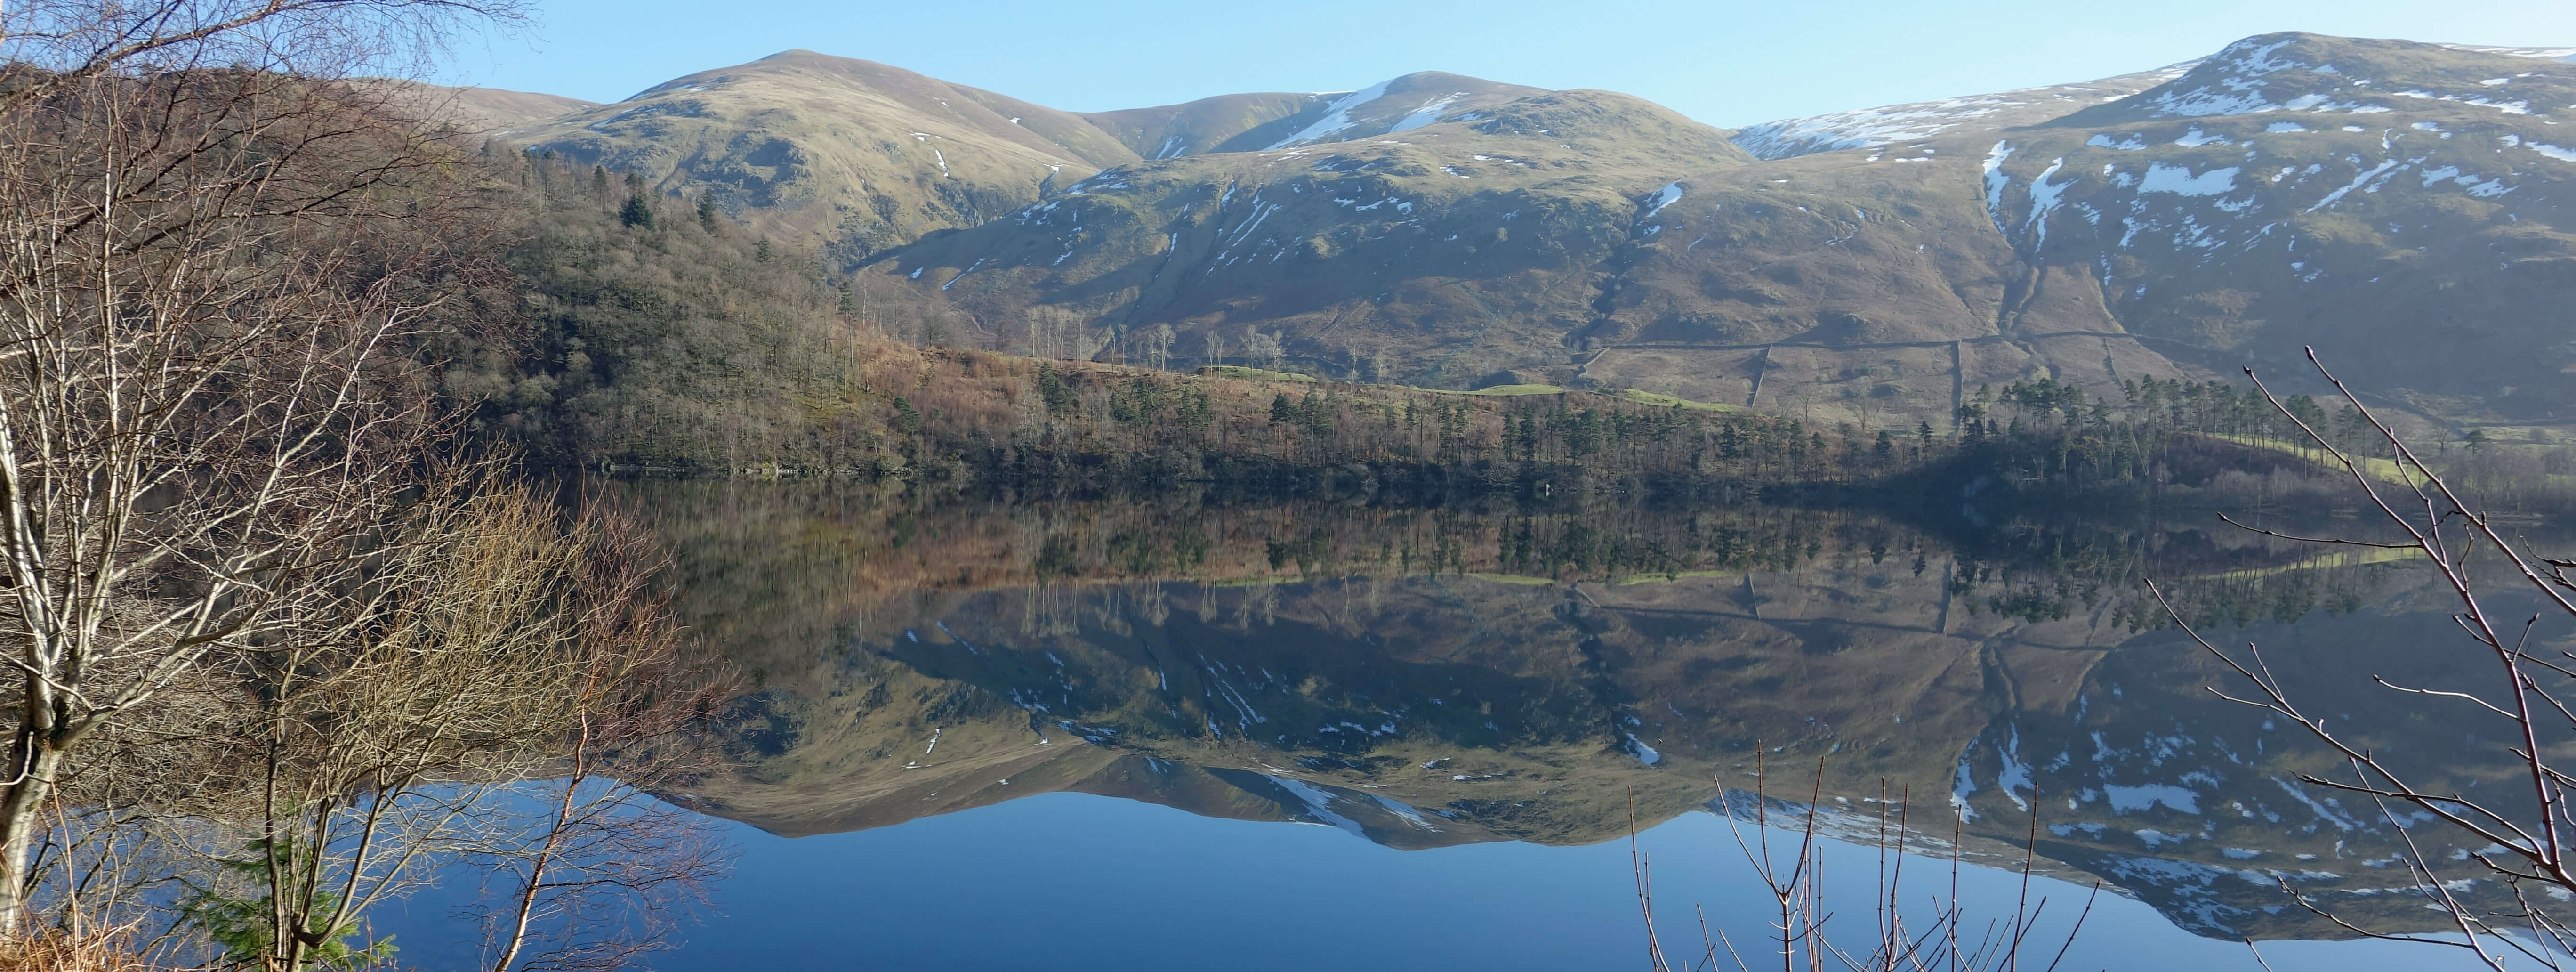 across Thirlmere